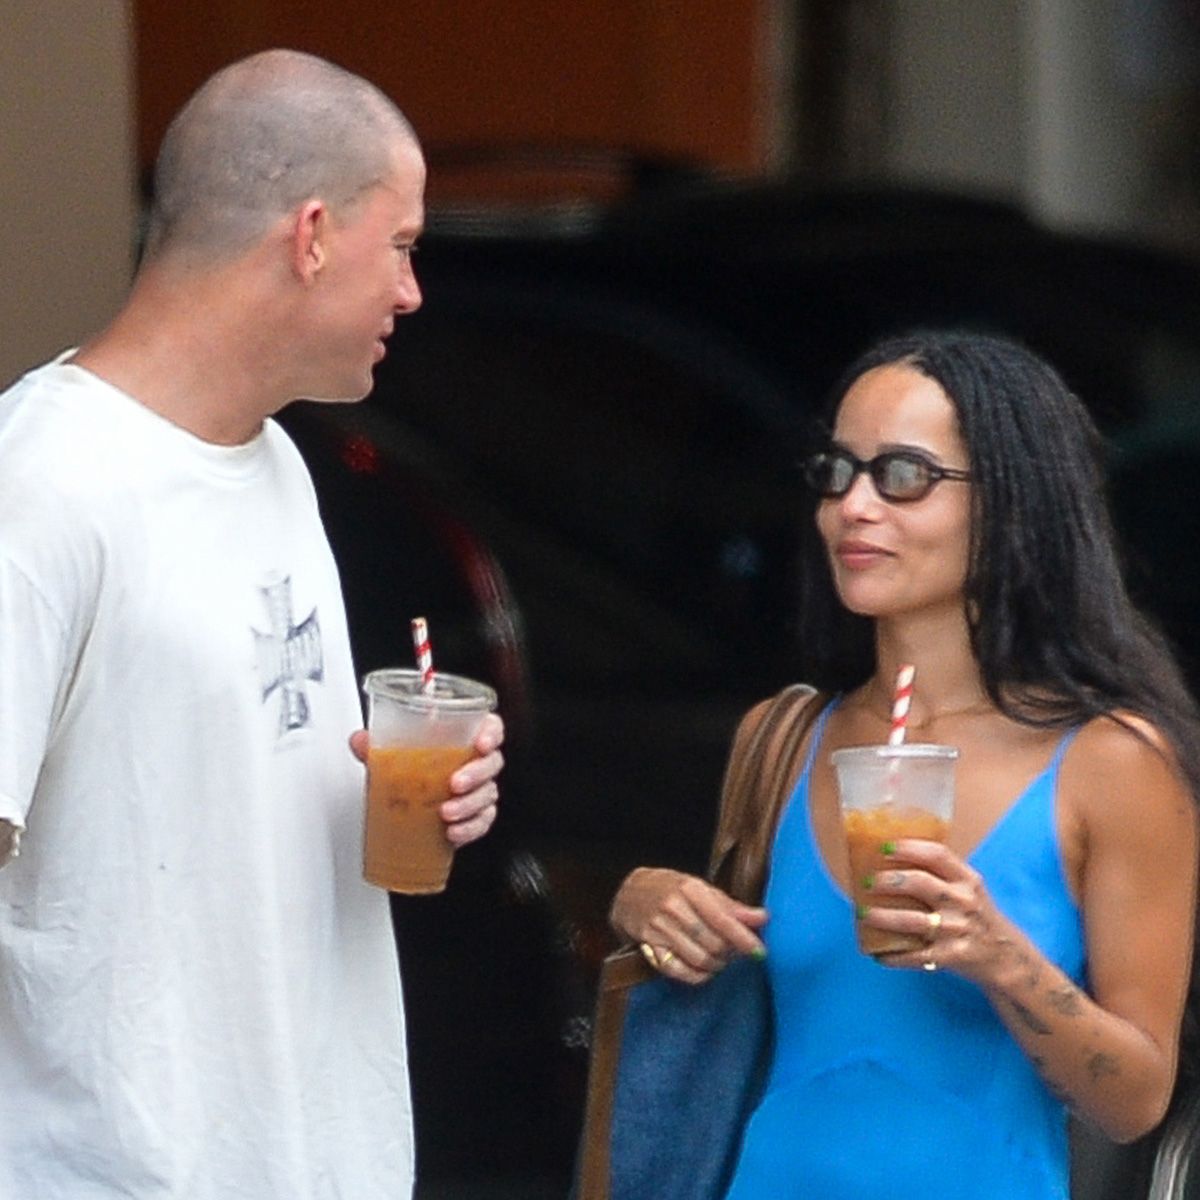 Zoë Kravitz Wore the Perfect Date Outfit With Channing Tatum